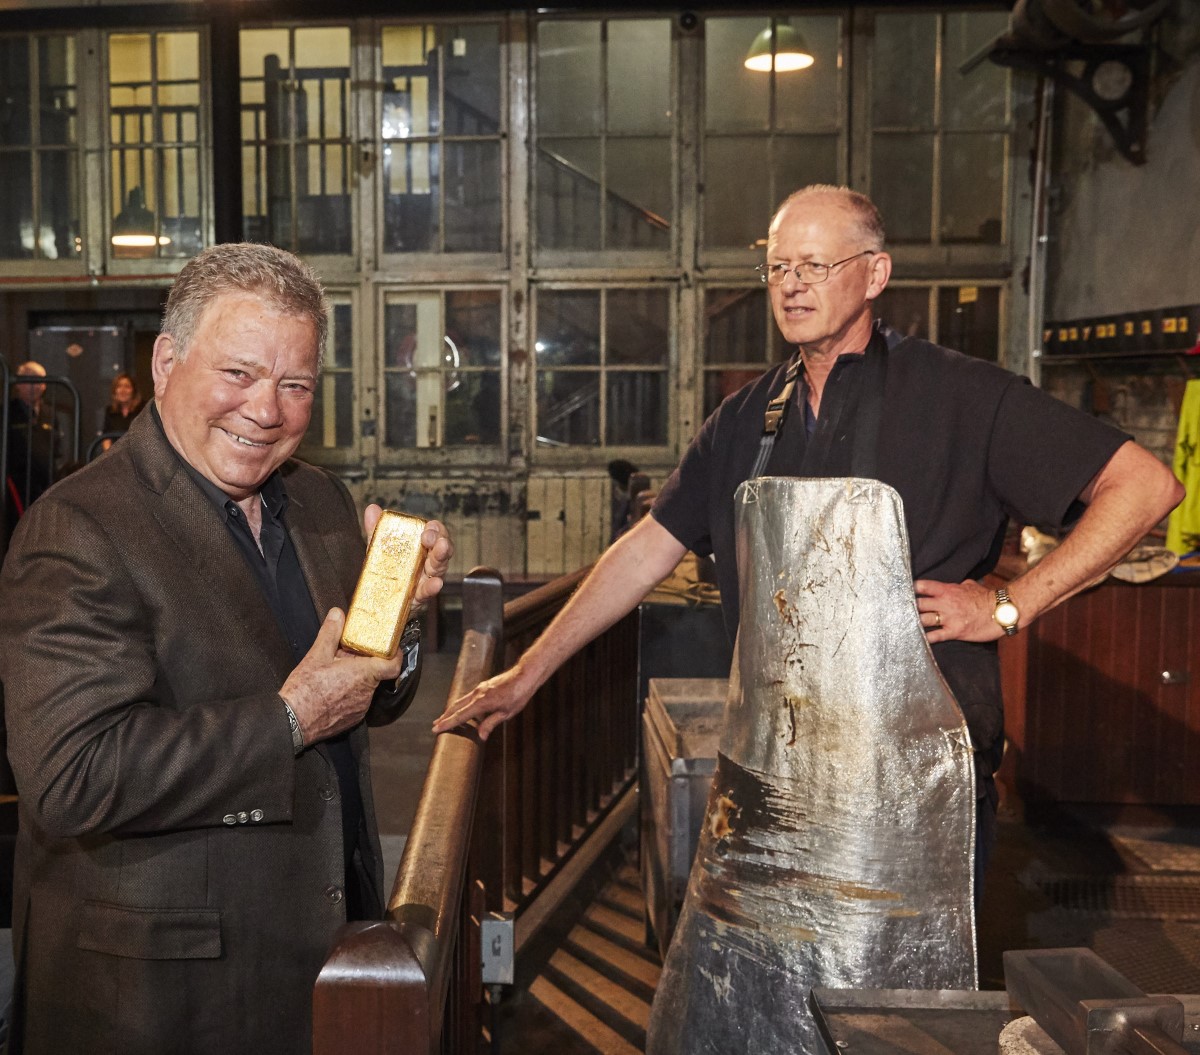 William Shatner holding a gold bar at The Perth Mint